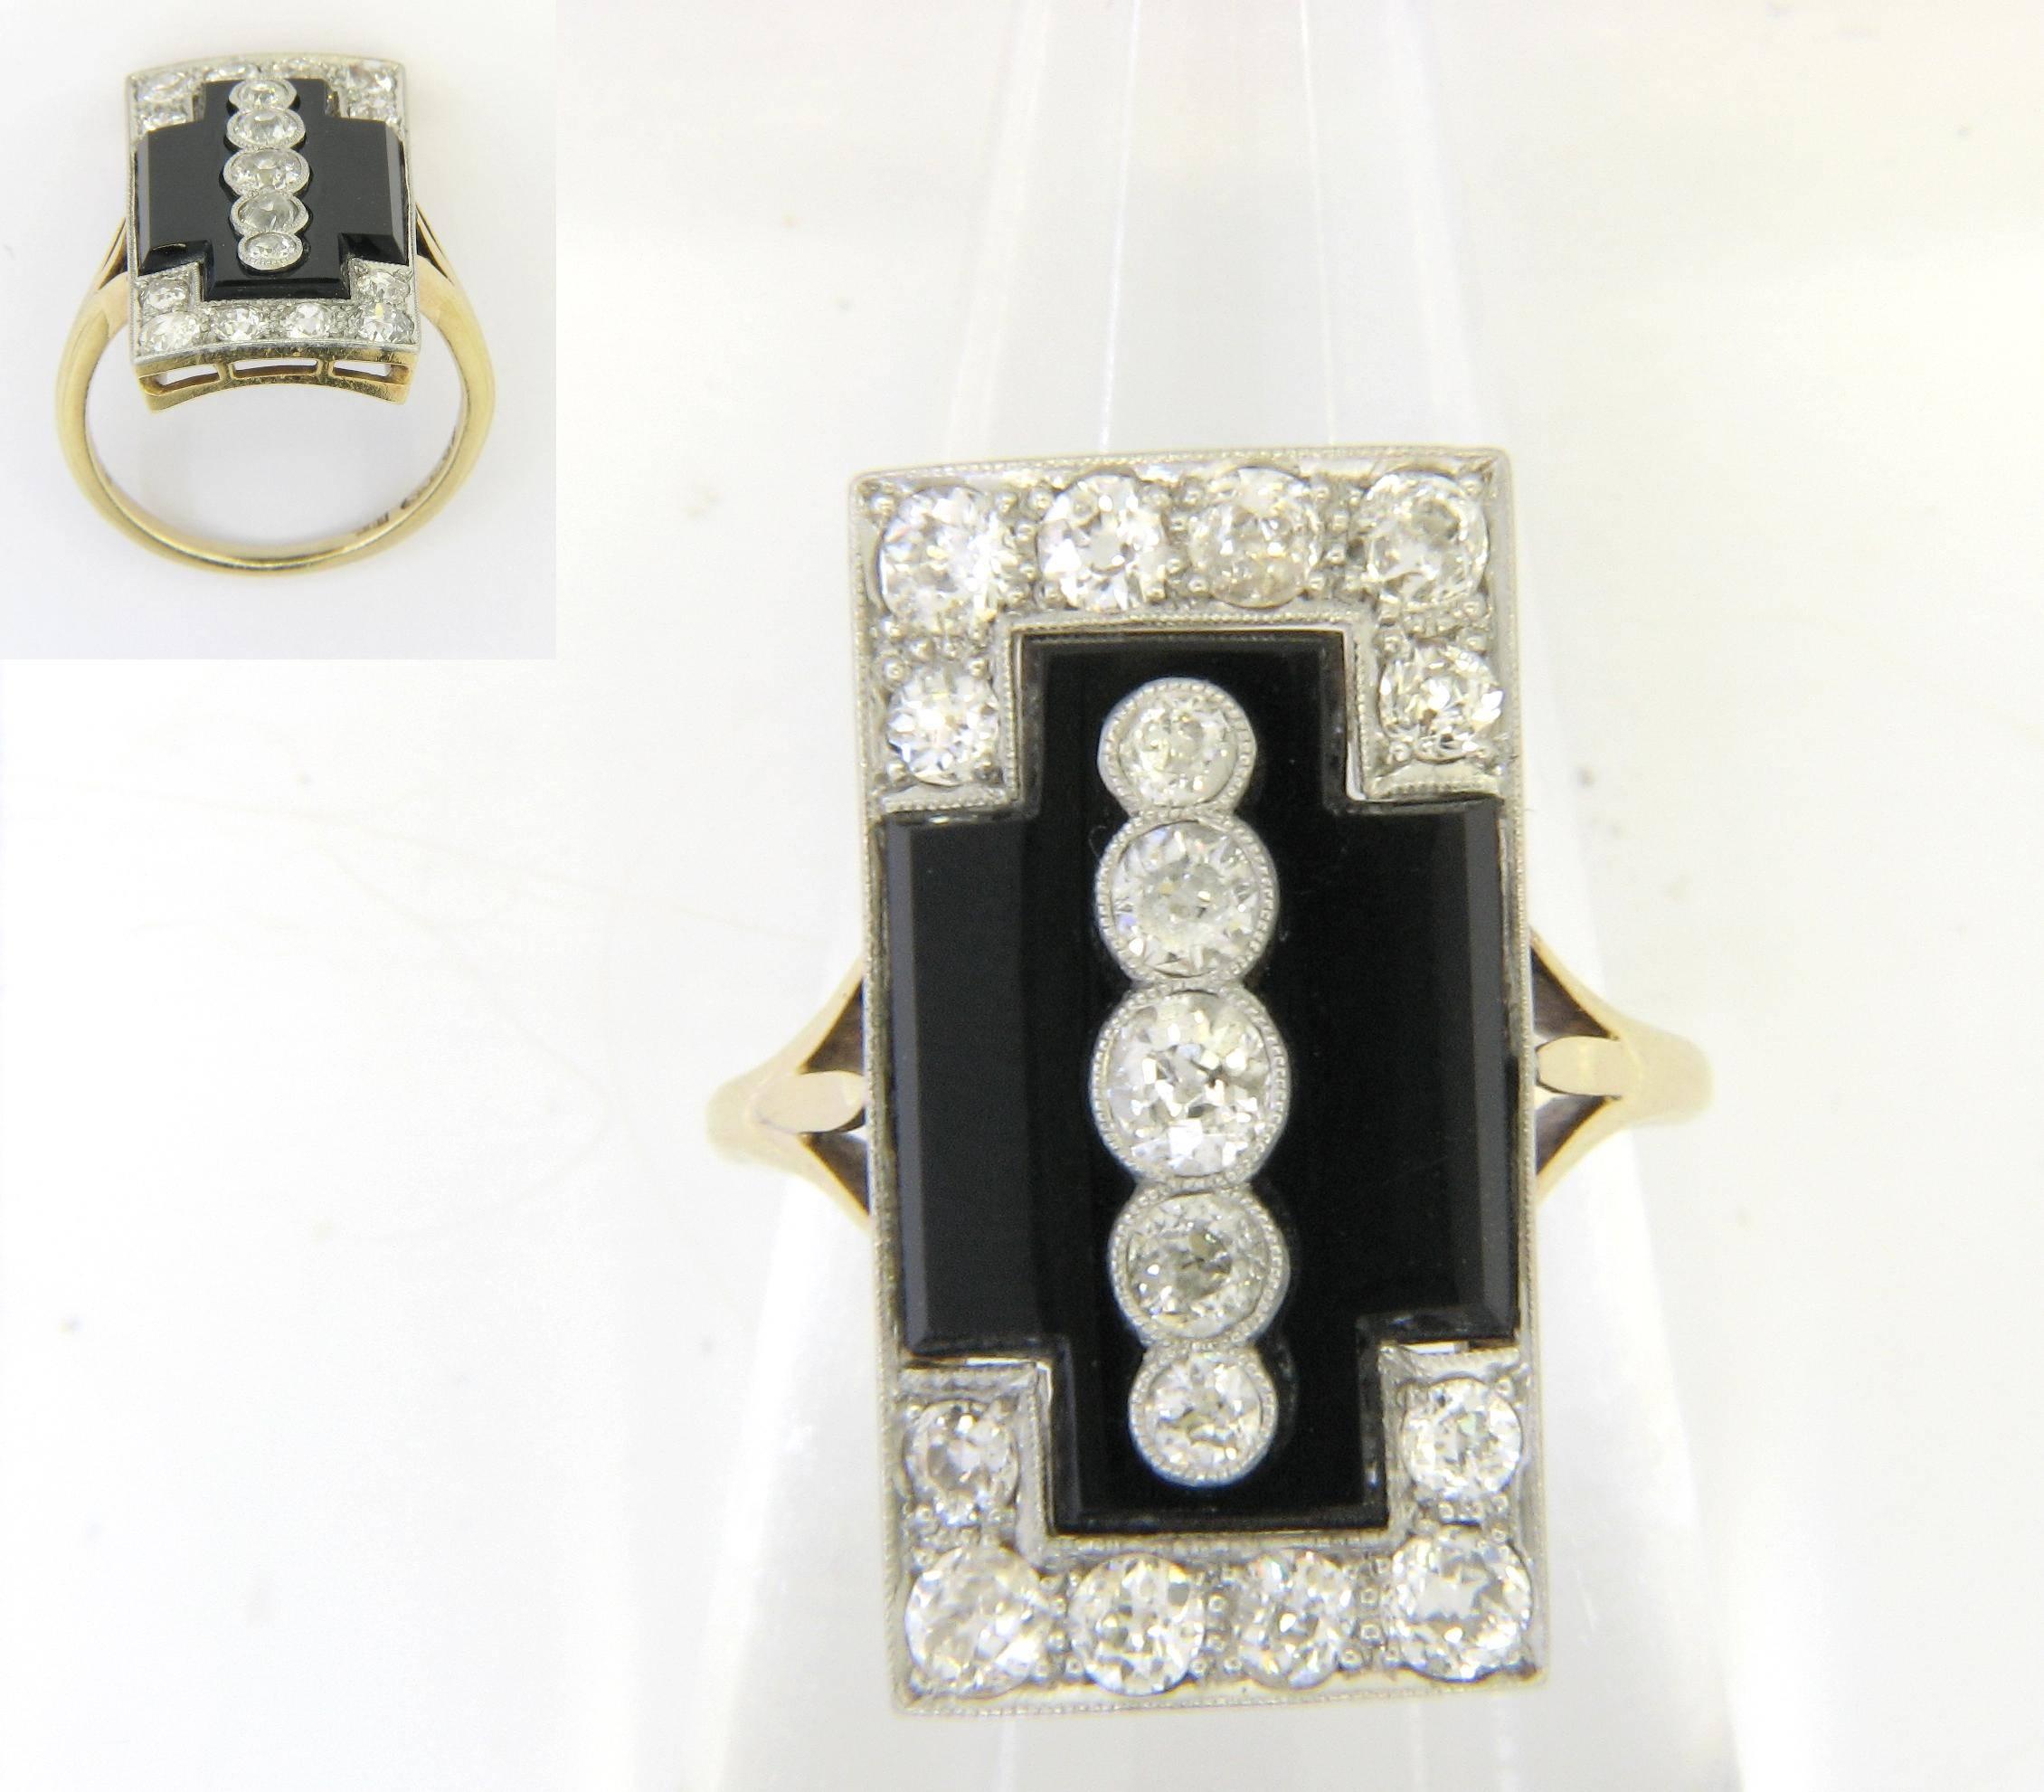 Stunning Art Deco Onyx and Diamond Ring in 18ct Gold and Platinum set with 5 graduated old european cut diamonds of 0.05ct, 0.08ct, 0.15ct, 0.10ct, 0.04ct and 6 old cut diamonds on each end estimated 12=0.90ct colour H-I, clarity SI-I1. Total